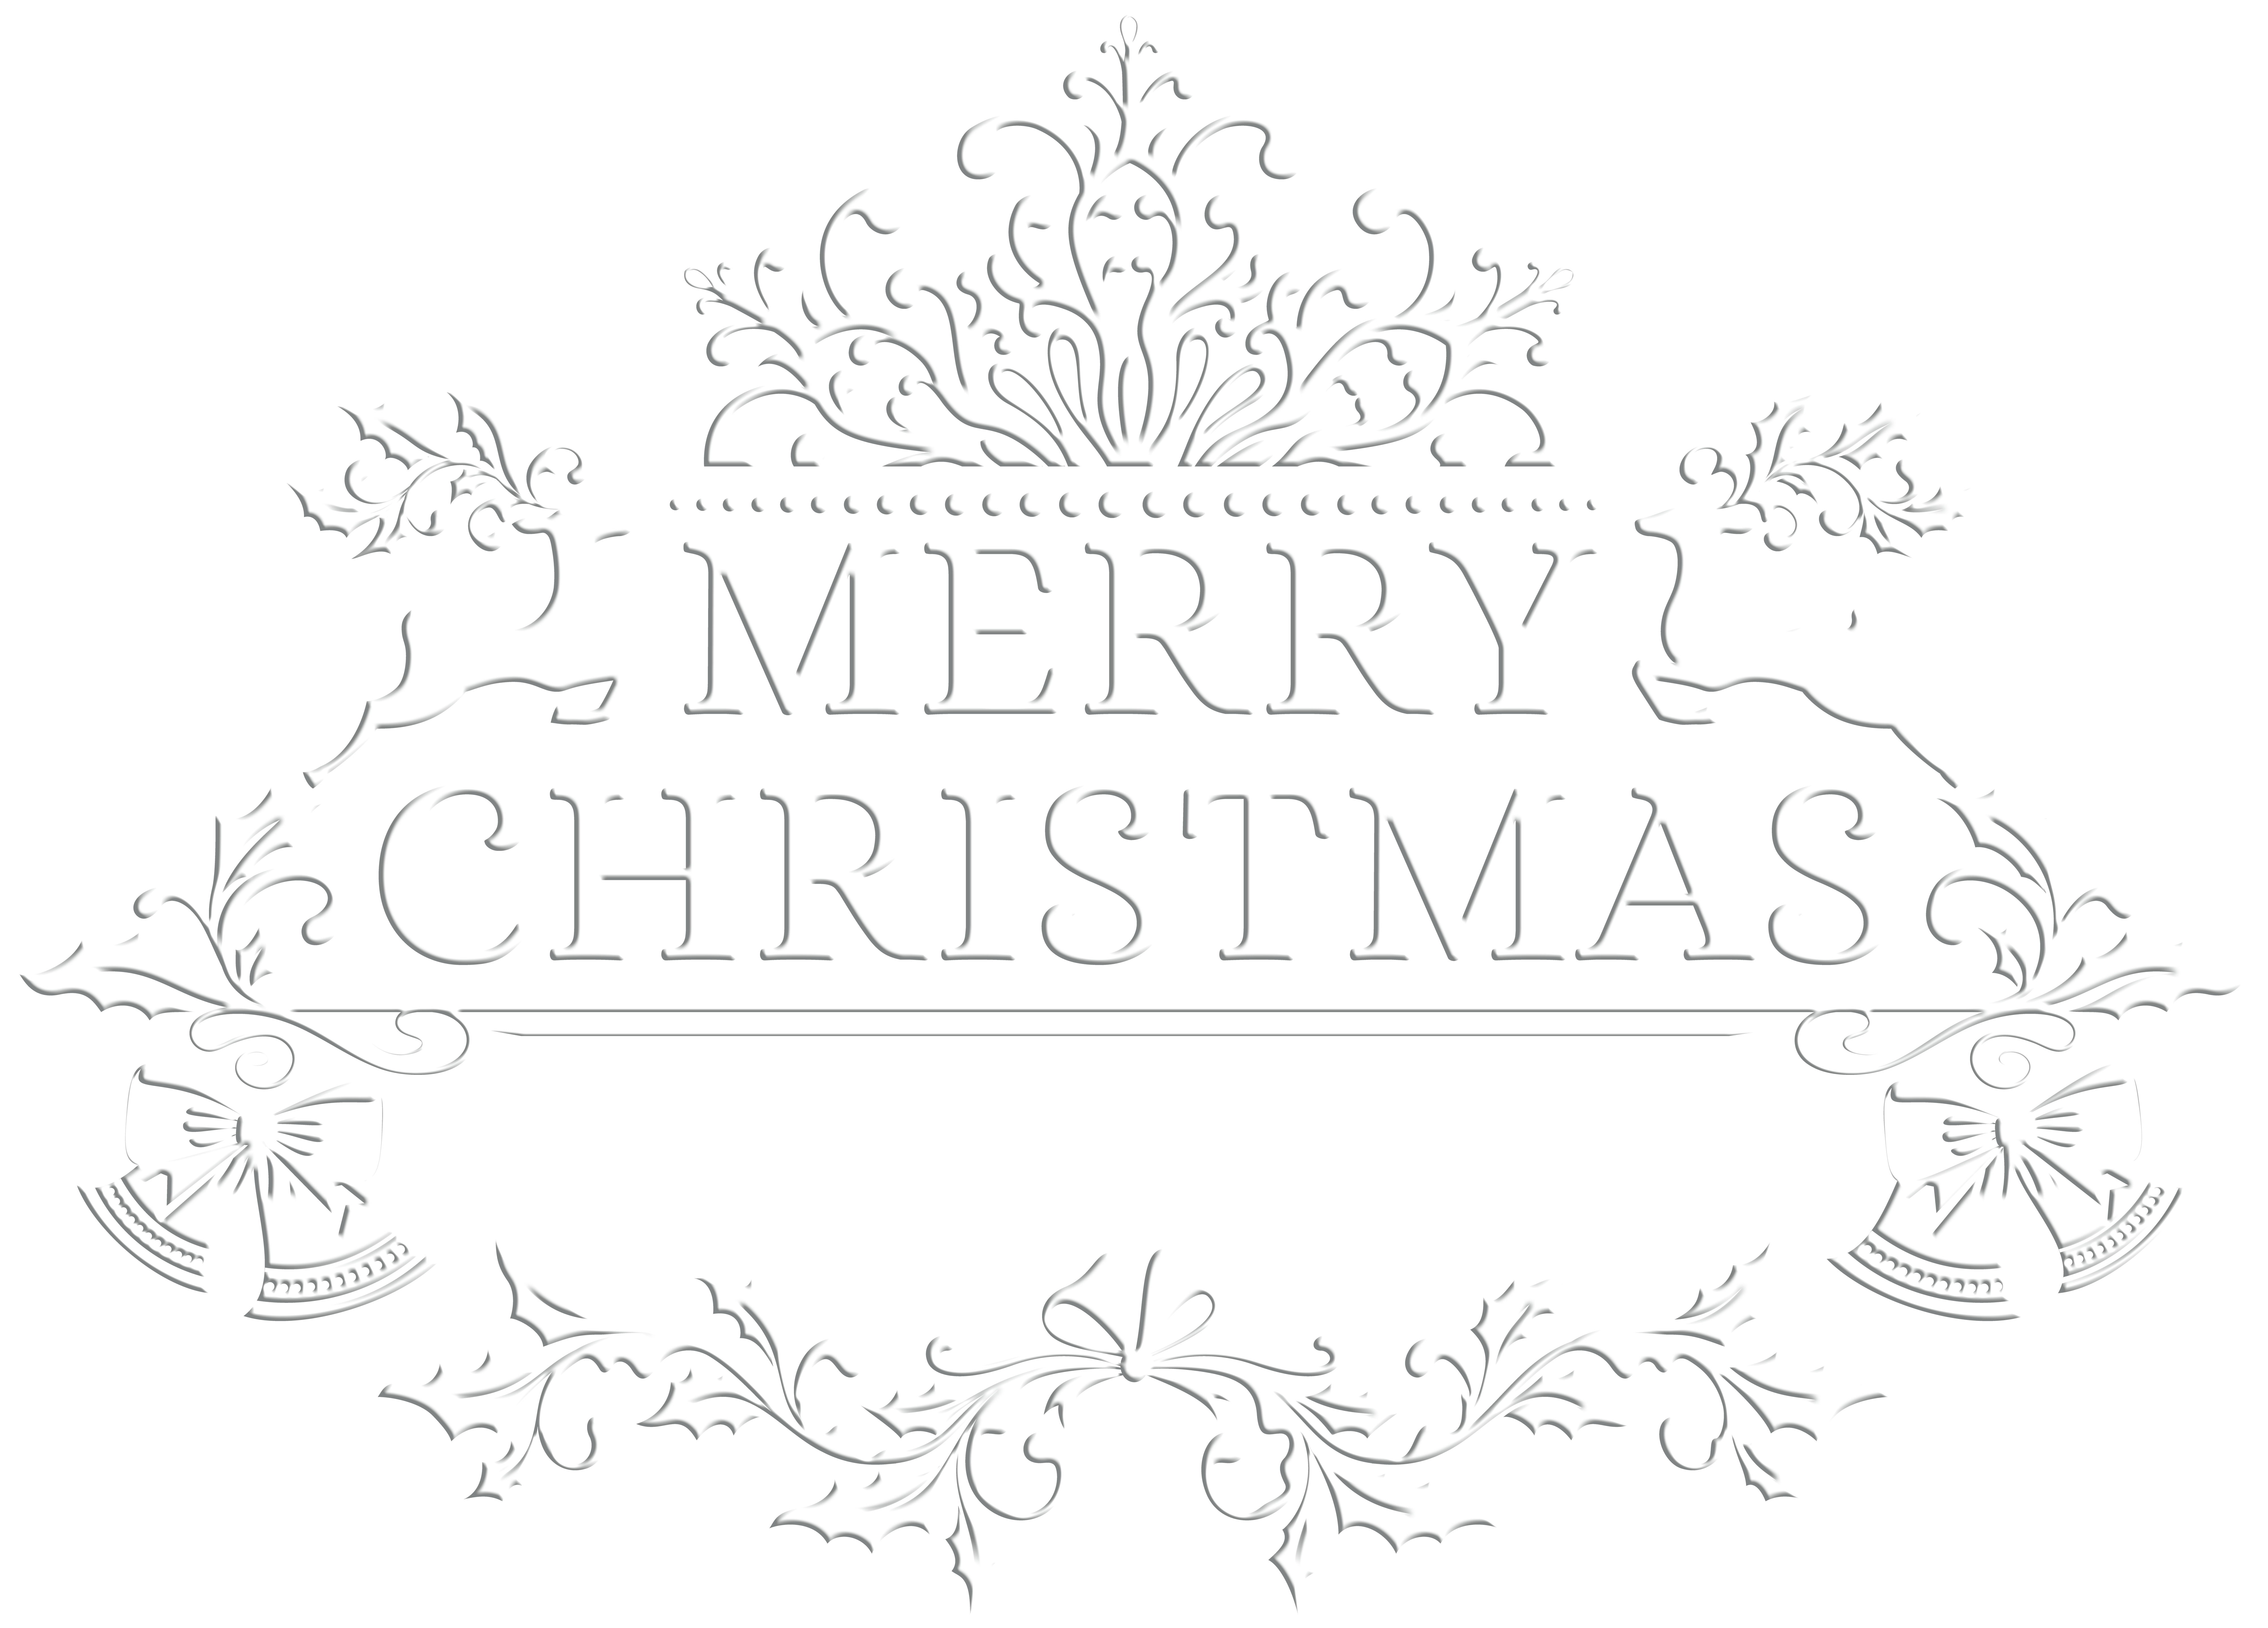 Download Merry Christmas White Transparent Png Clip Art Image Gallery Yopriceville High Quality Images And Transparent Png Free Clipart Yellowimages Mockups